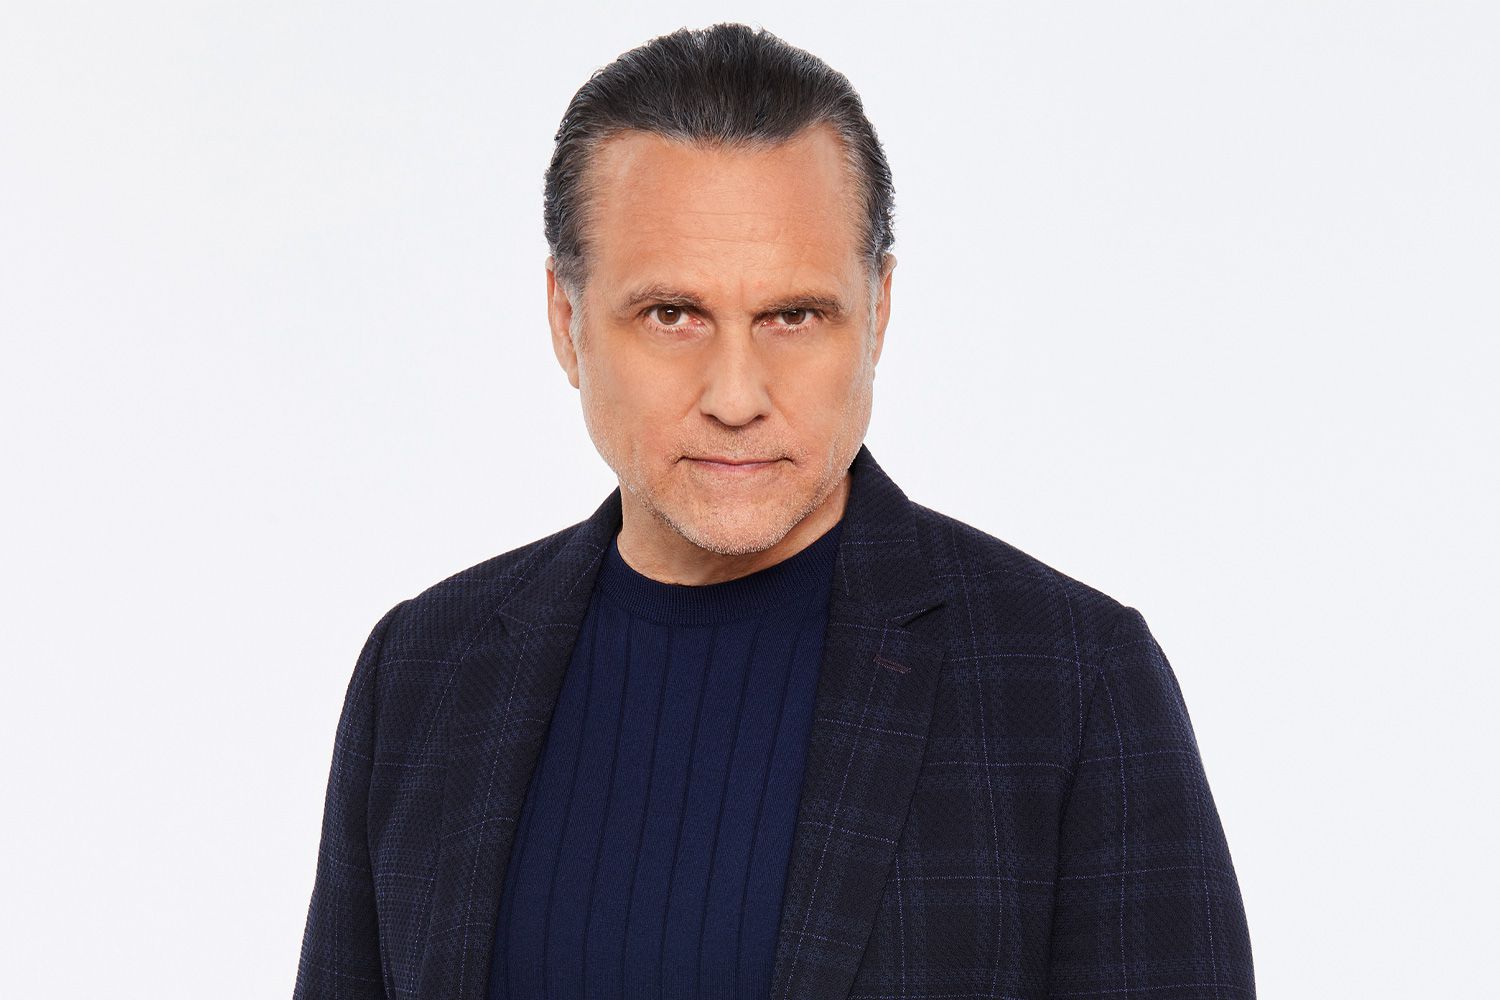 Maurice benard who play Sonny in General Hospital